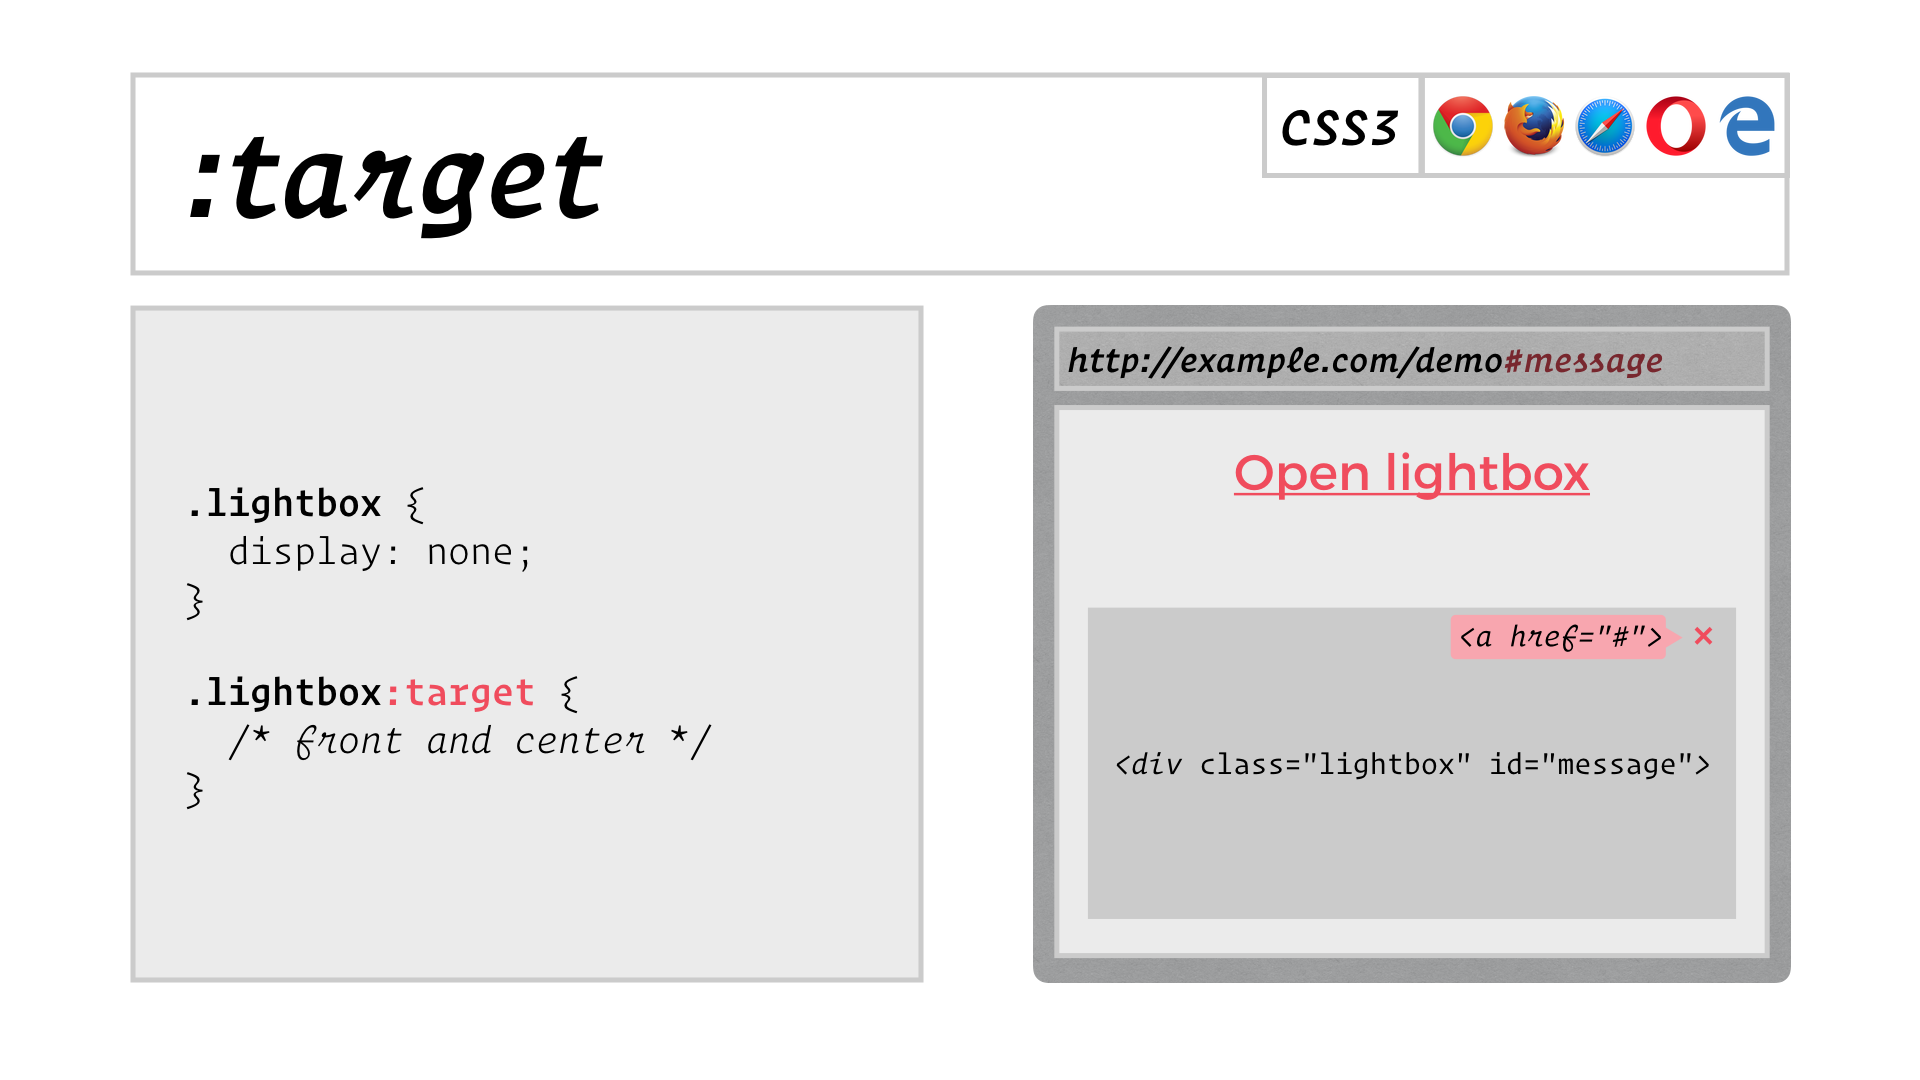 slide: the lightbox appears after following the link, and contains a close button that links back to an empty fragment identifier